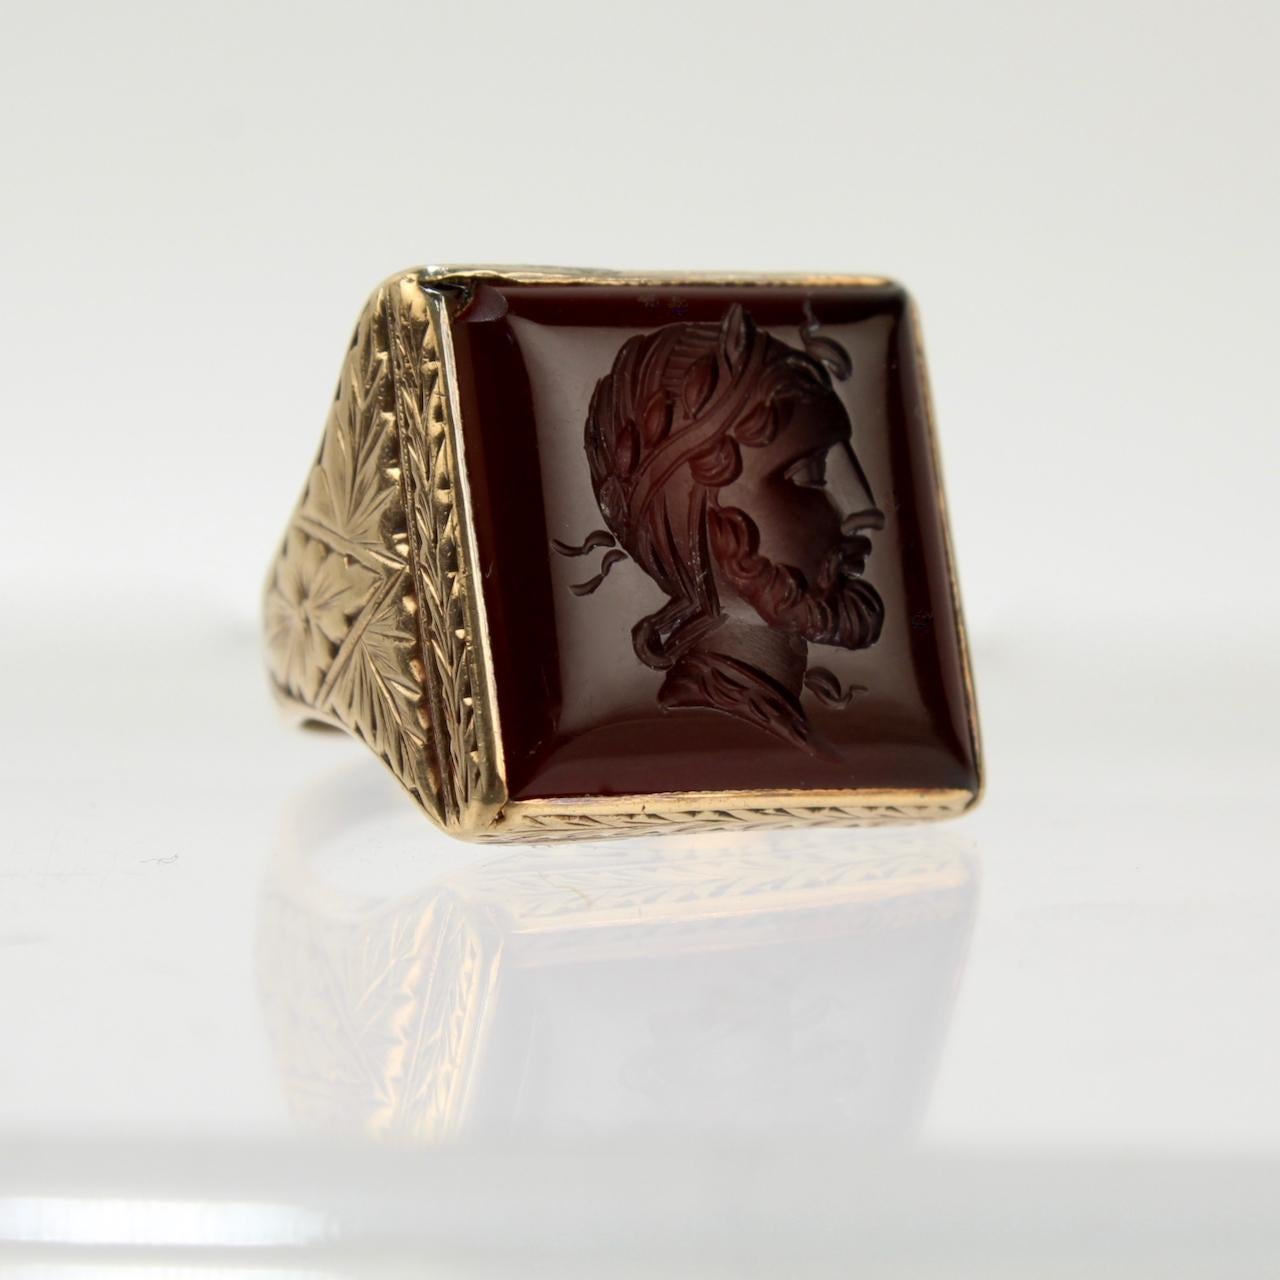 Cabochon 14 Karat Gold Carved Carnelian Intaglio Signet Ring with a Roman Bust